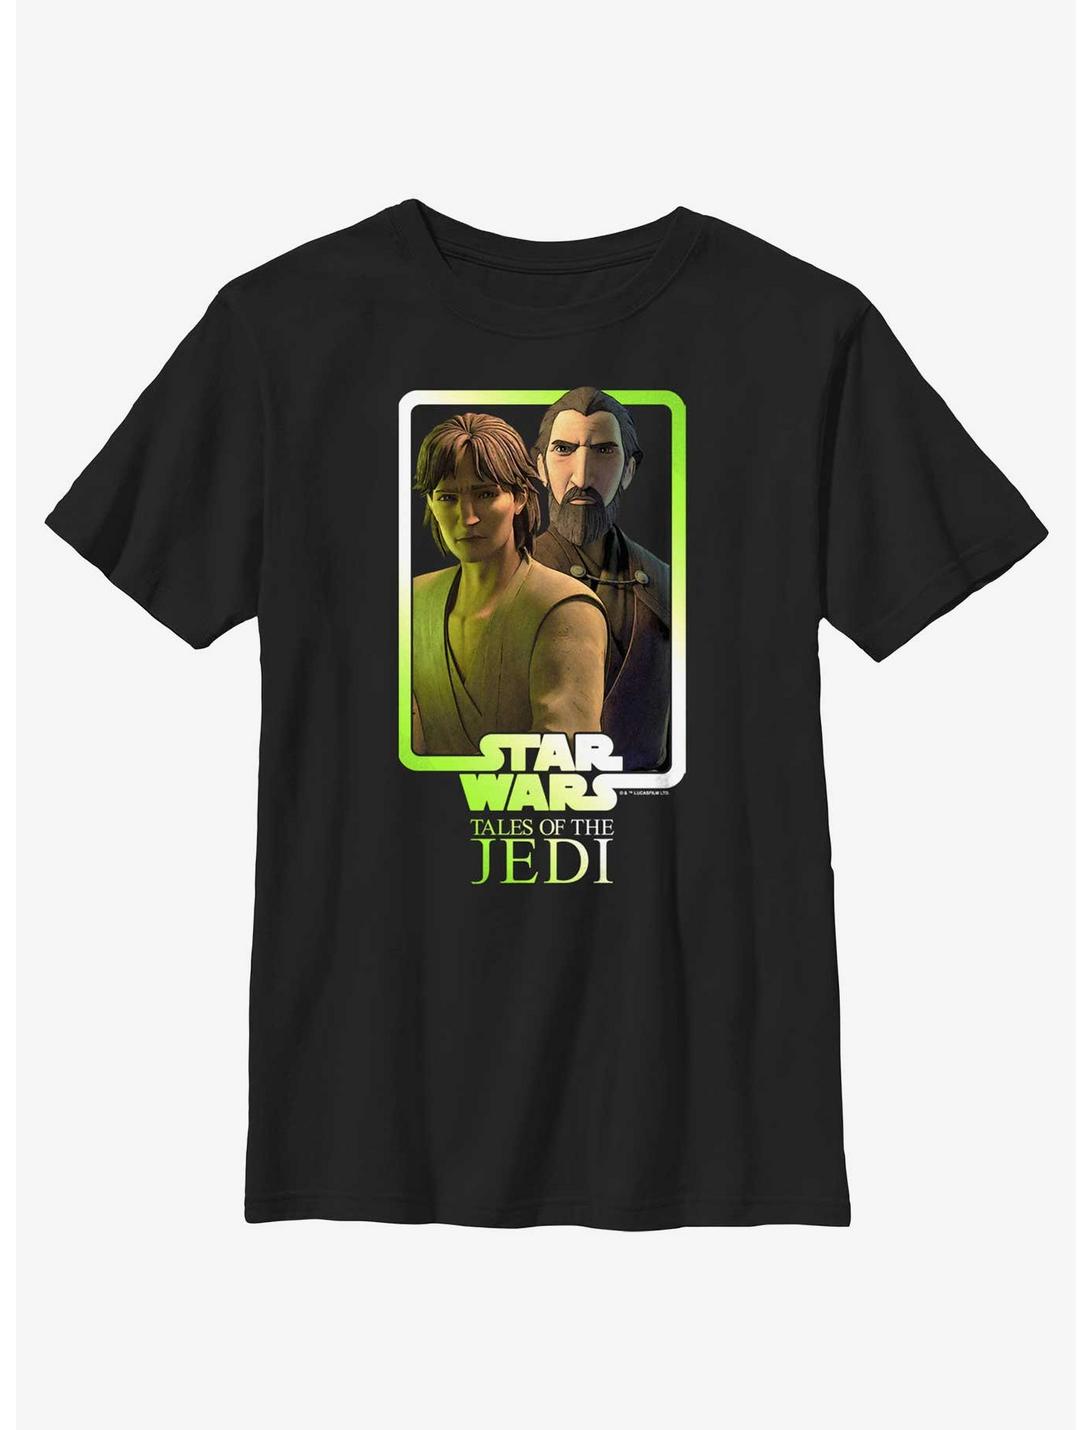 Star Wars: Tales of the Jedi Master and Apprentice Count Dooku and Qui-Gon Jinn Youth T-Shirt, BLACK, hi-res